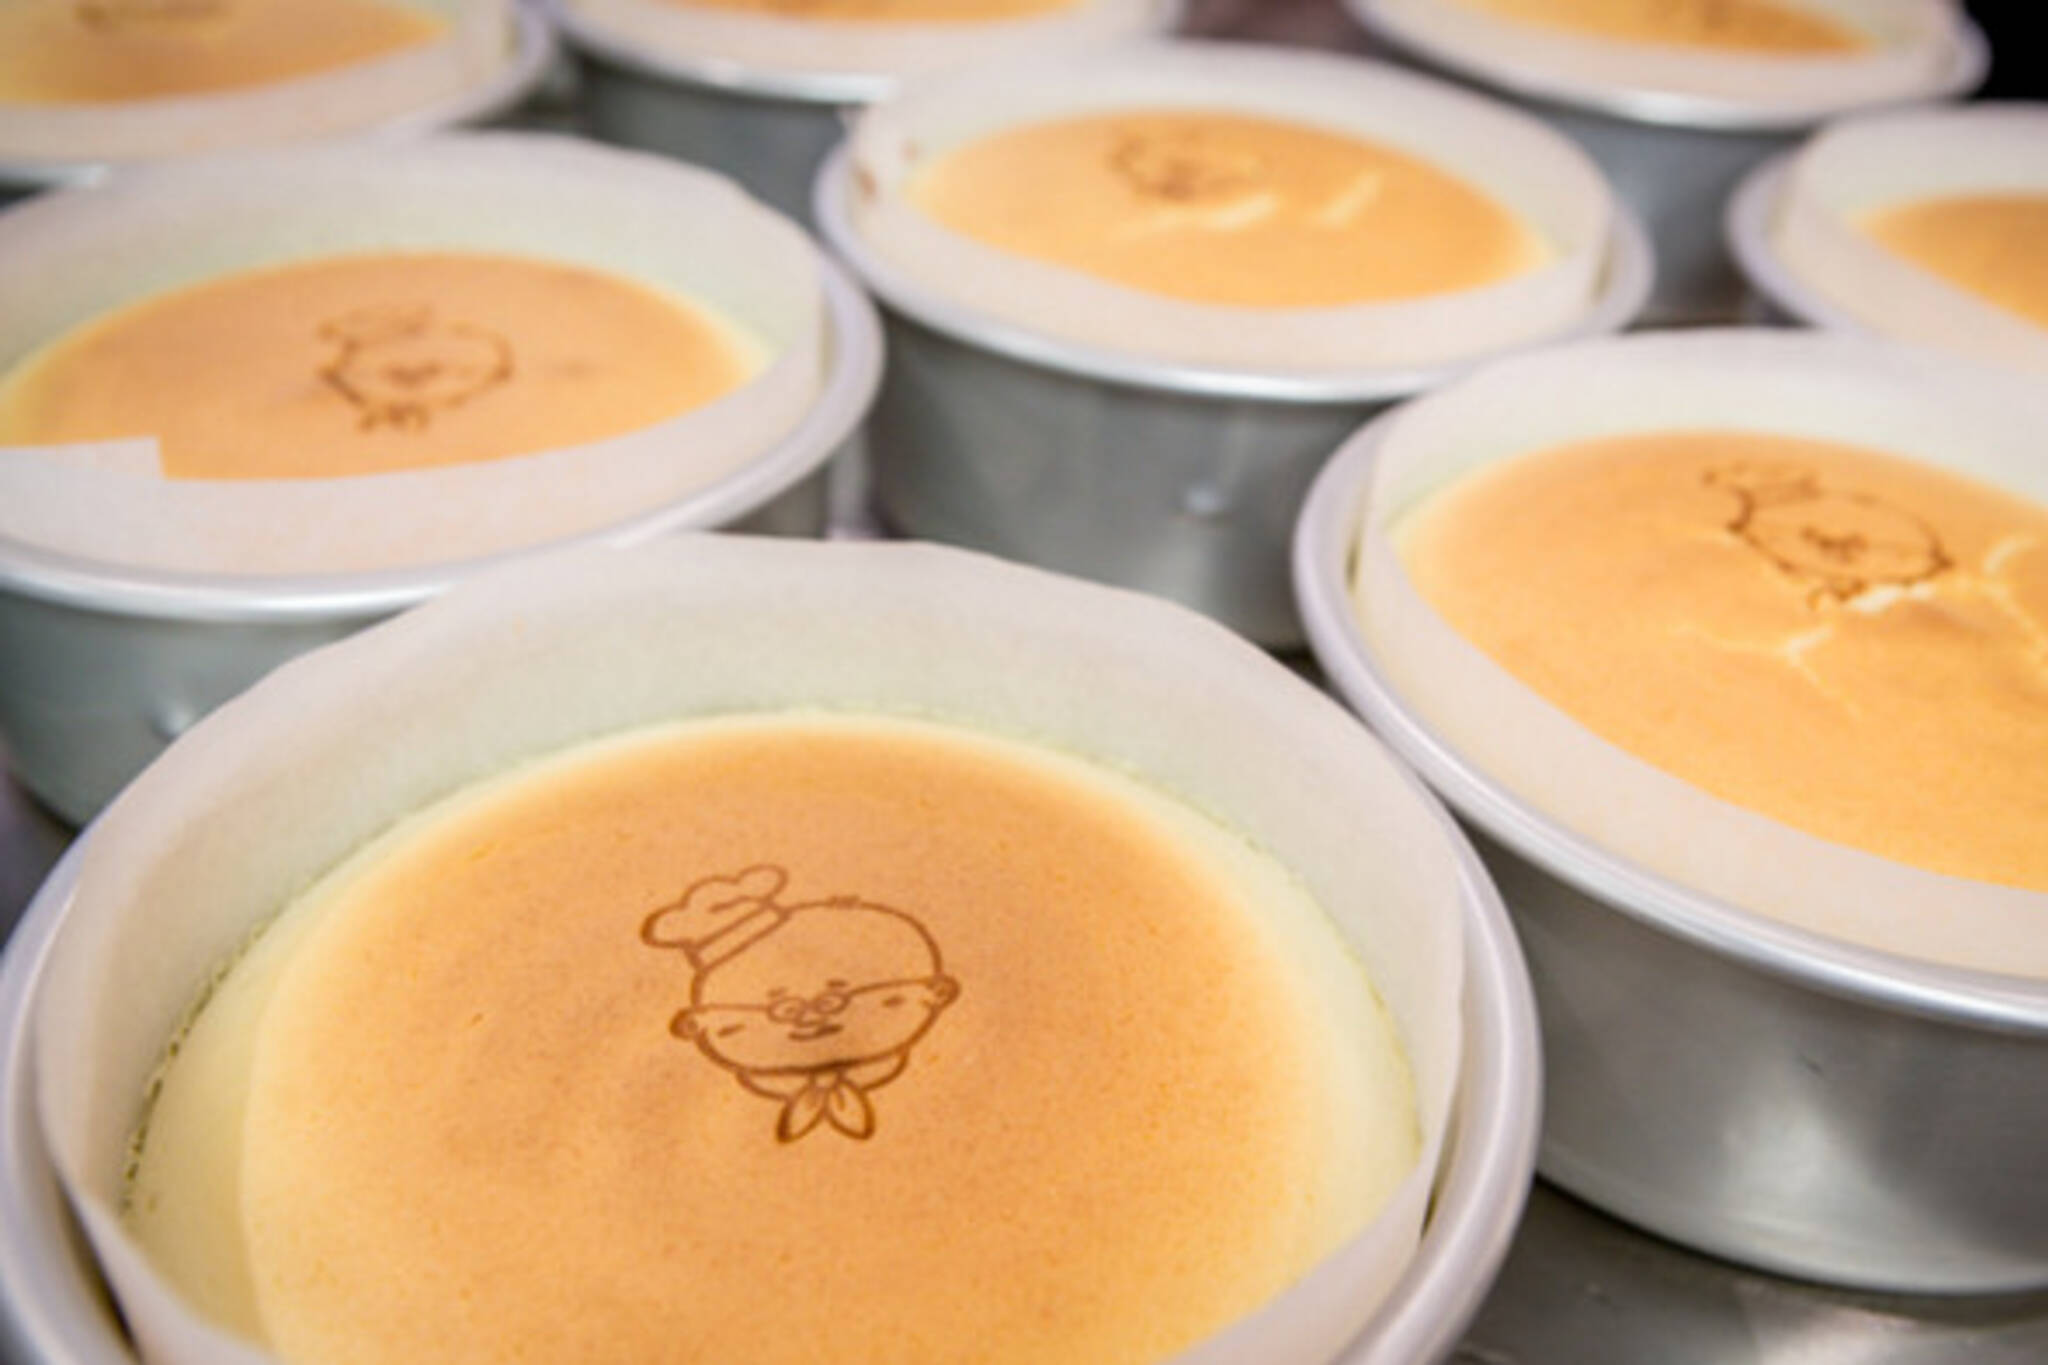 Uncle Tetsu opening another Toronto location